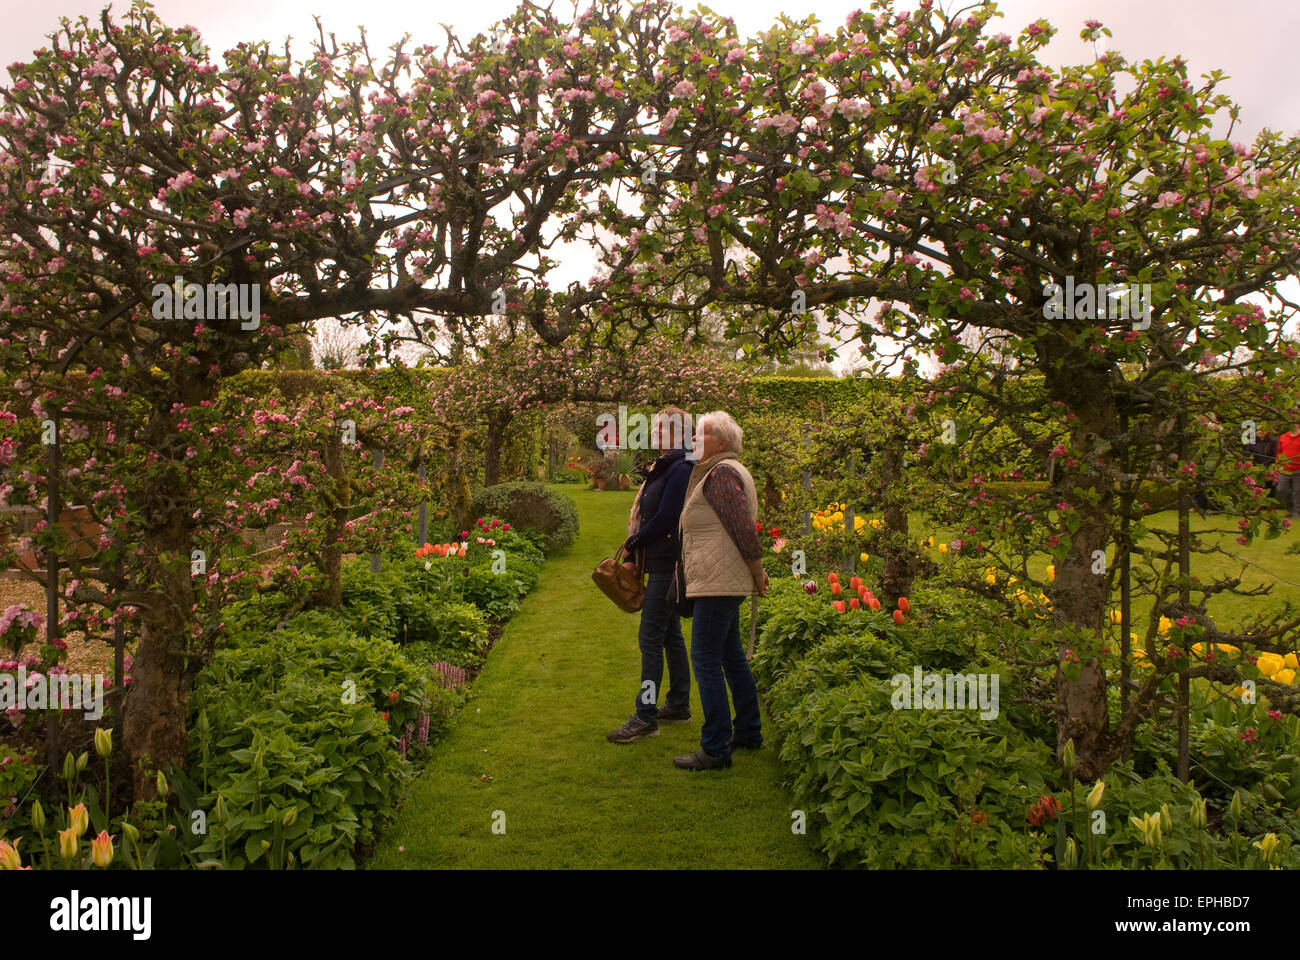 People admiring the blooms during an open day at a stately home, East Tisted, Hampshire, UK. Stock Photo